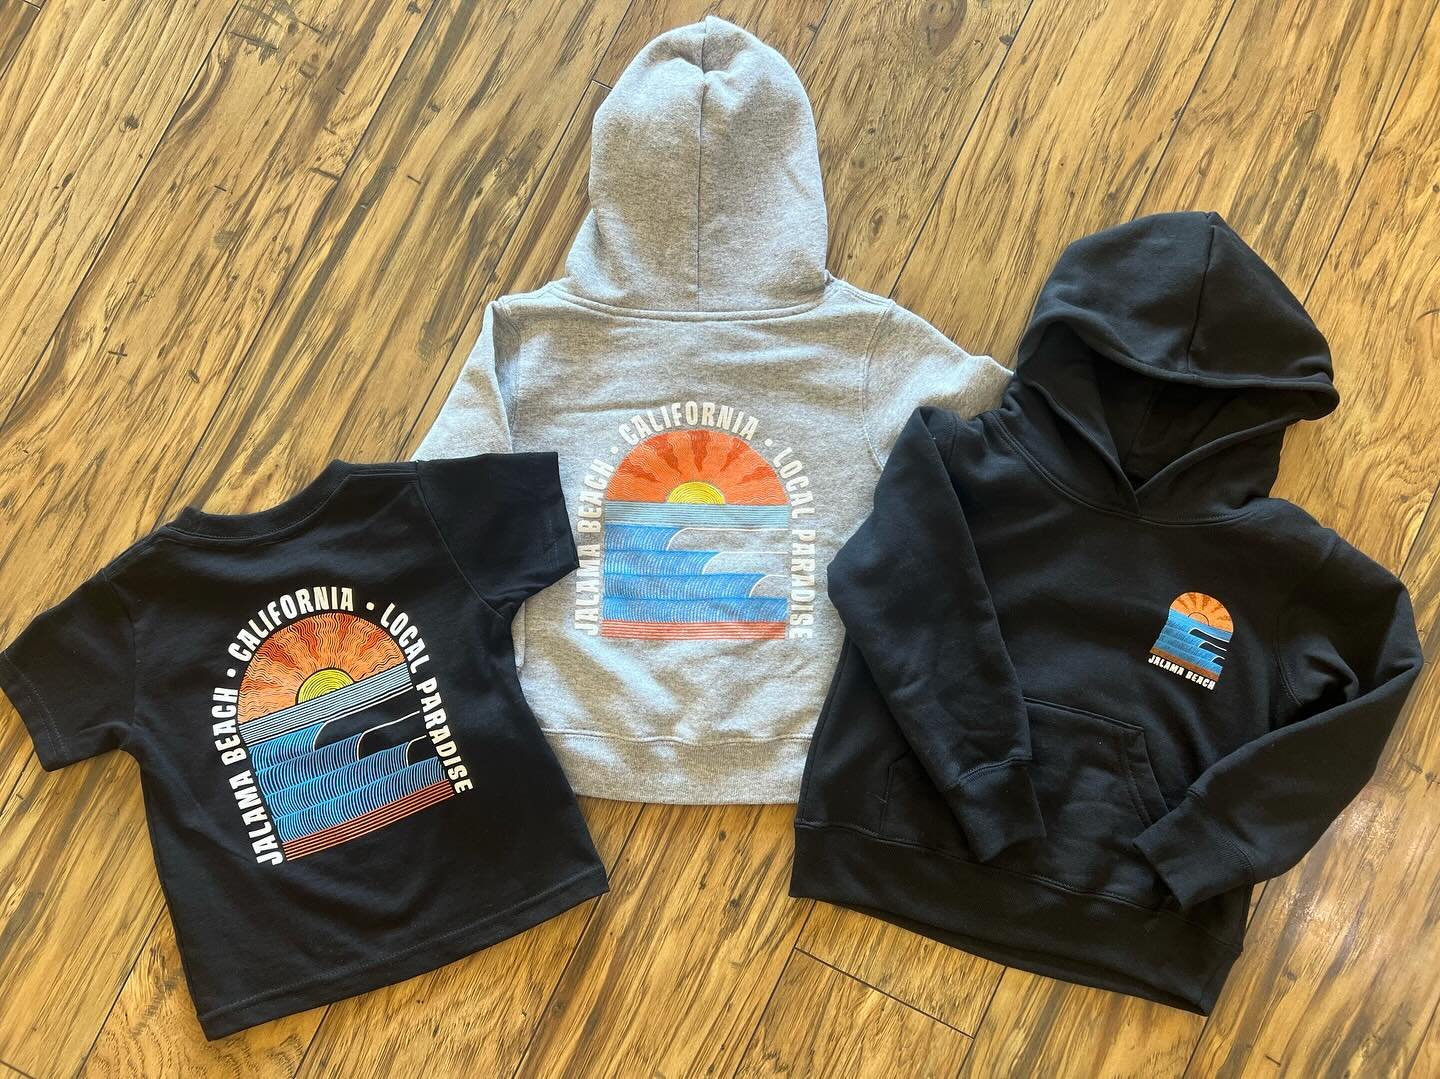 Jalama beach clothing in stock now for groms of all ages! We now have jalama beach hoodies and a T shirt for toddler and kids! Come by and grab one before they are gone! #jalamabeach #groms #shoplocal #surfconnection